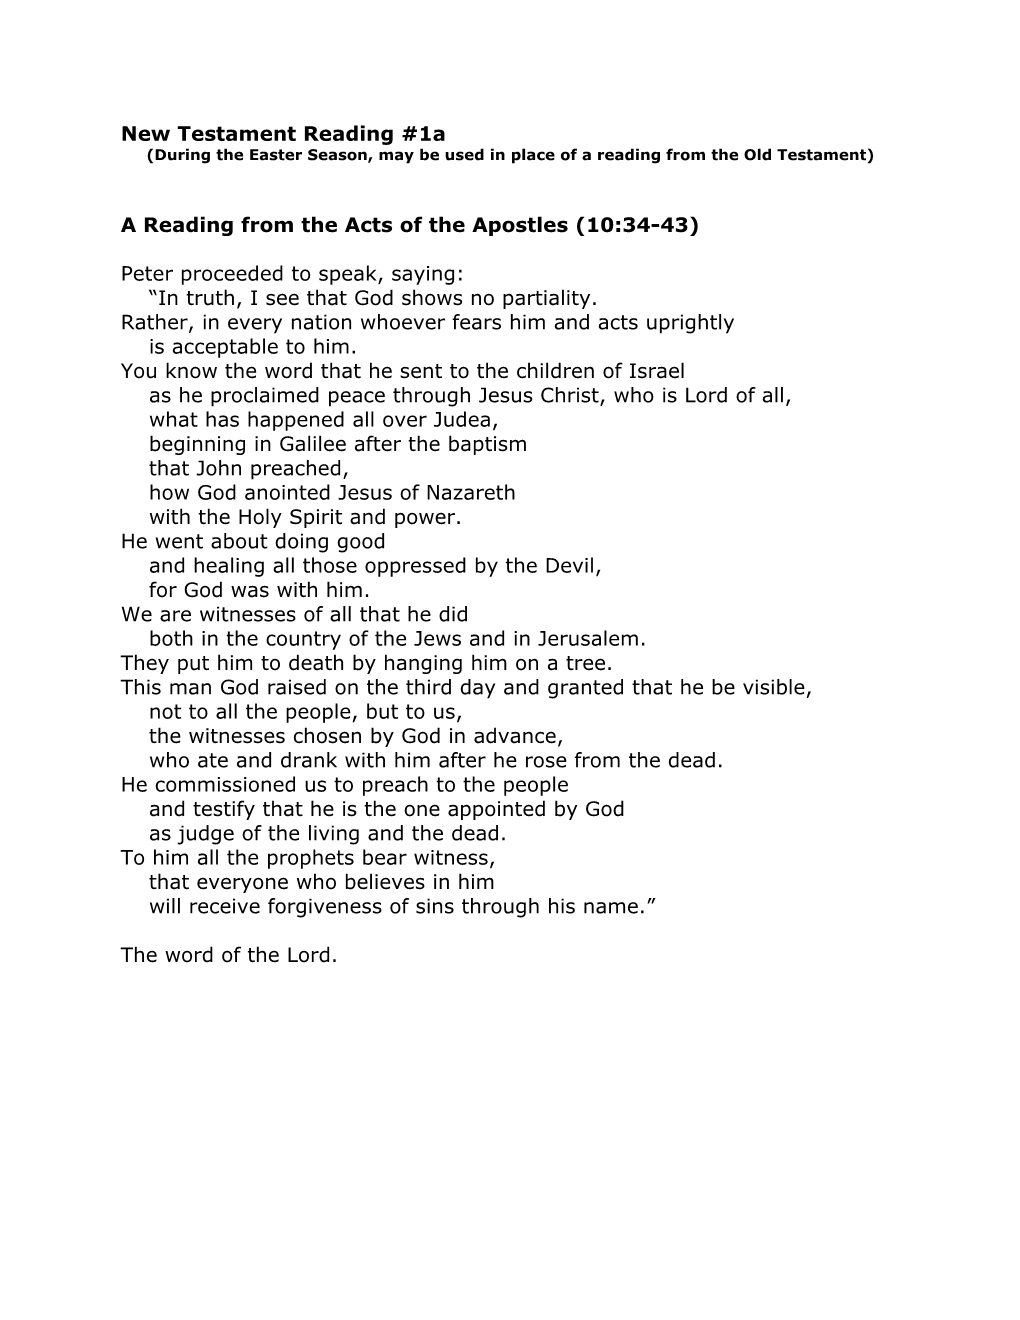 A Reading from the Acts of the Apostles (10:34-43)